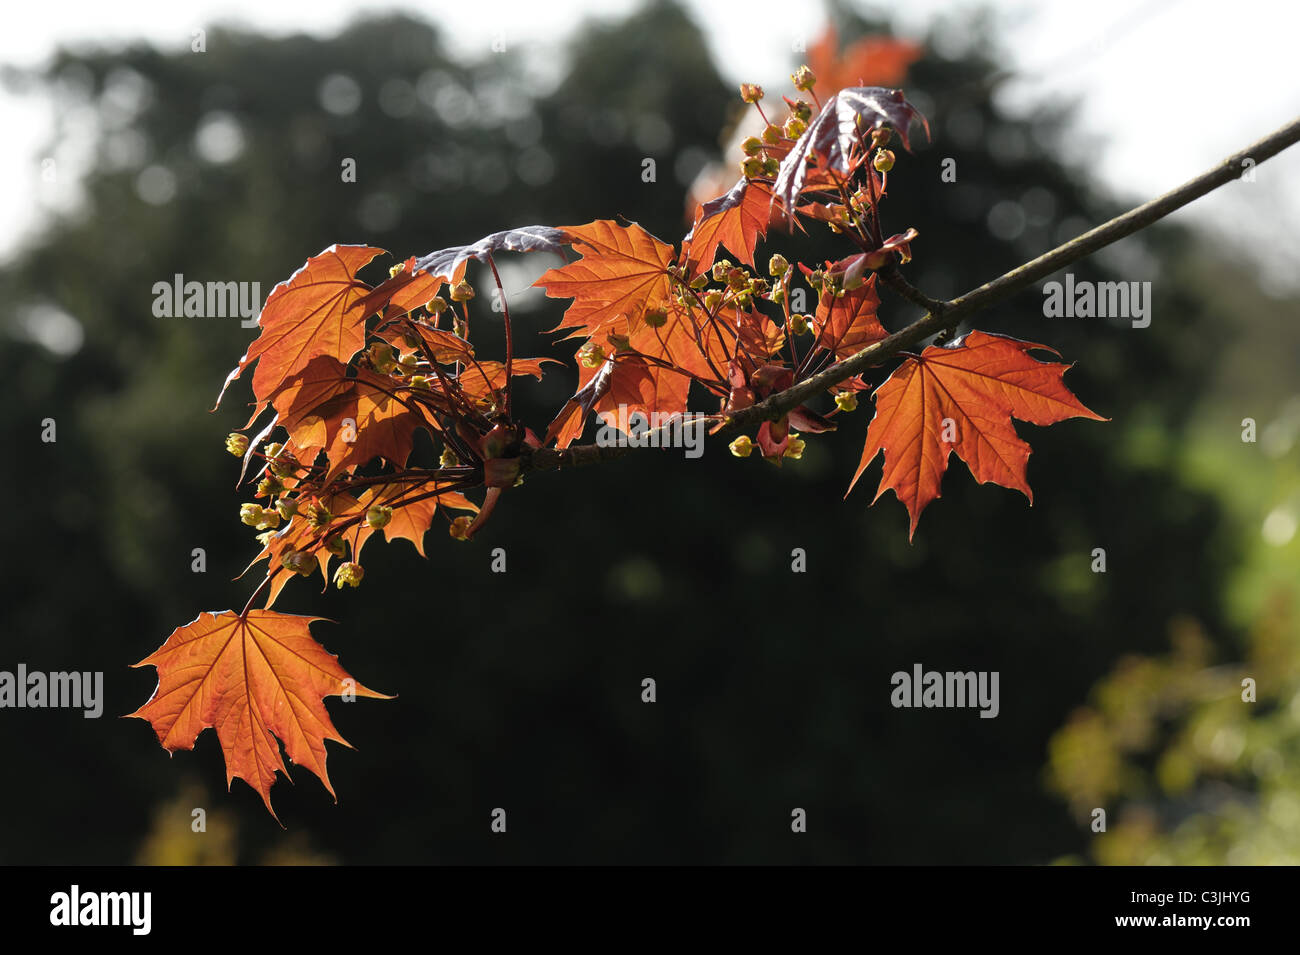 Young backlit red leaves on an ornamental maple tree Stock Photo